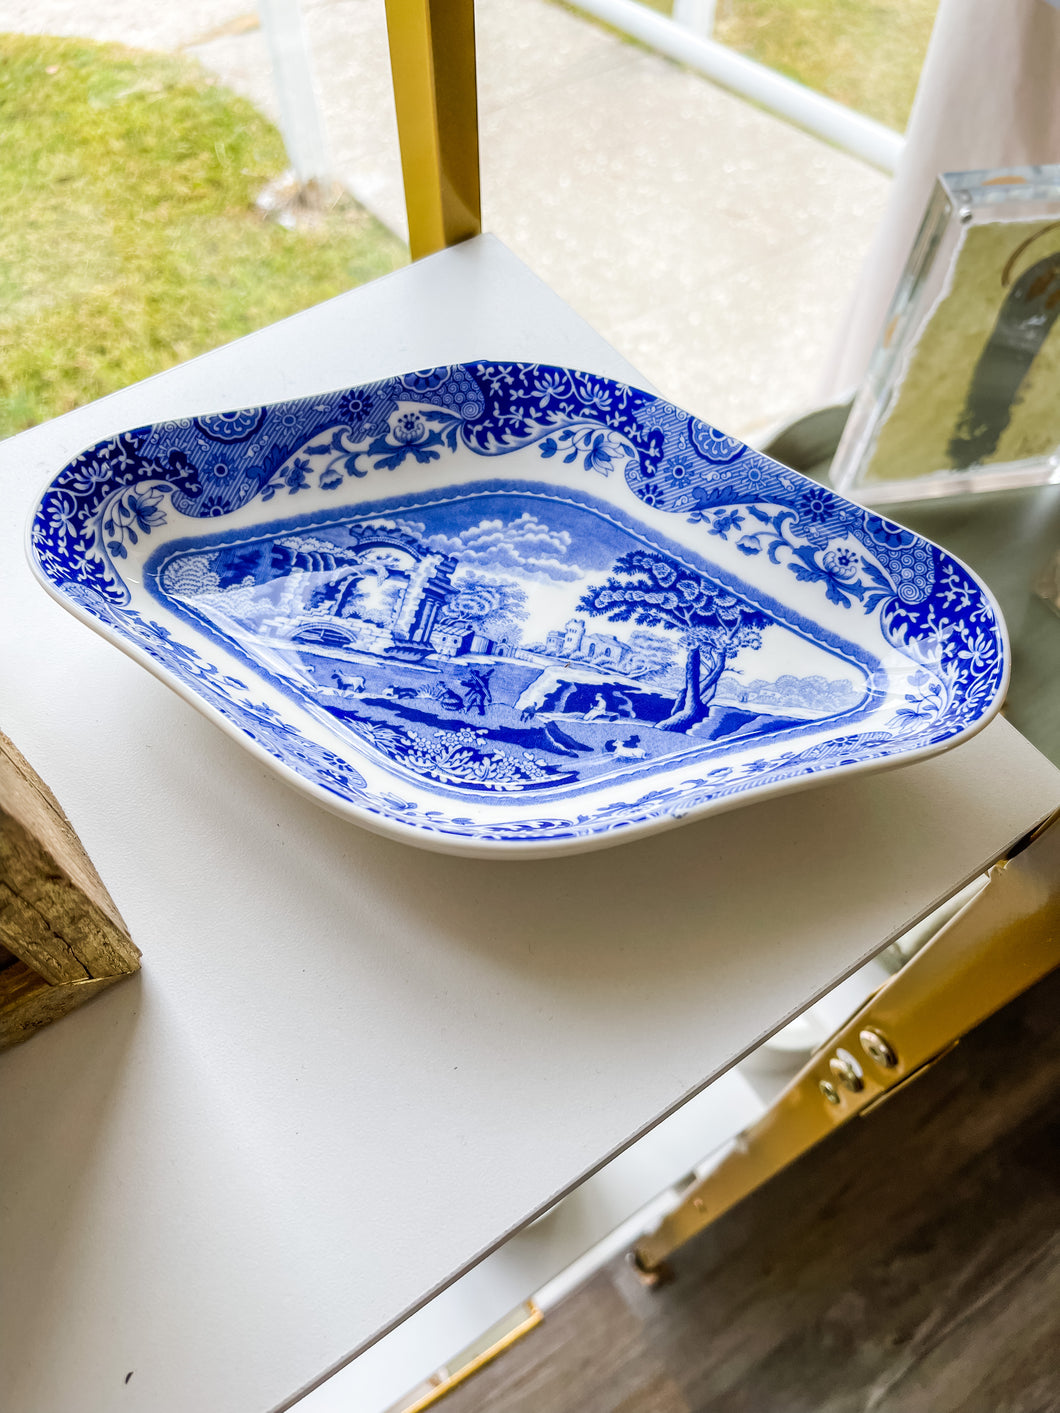 Blue and White Italian Dishes